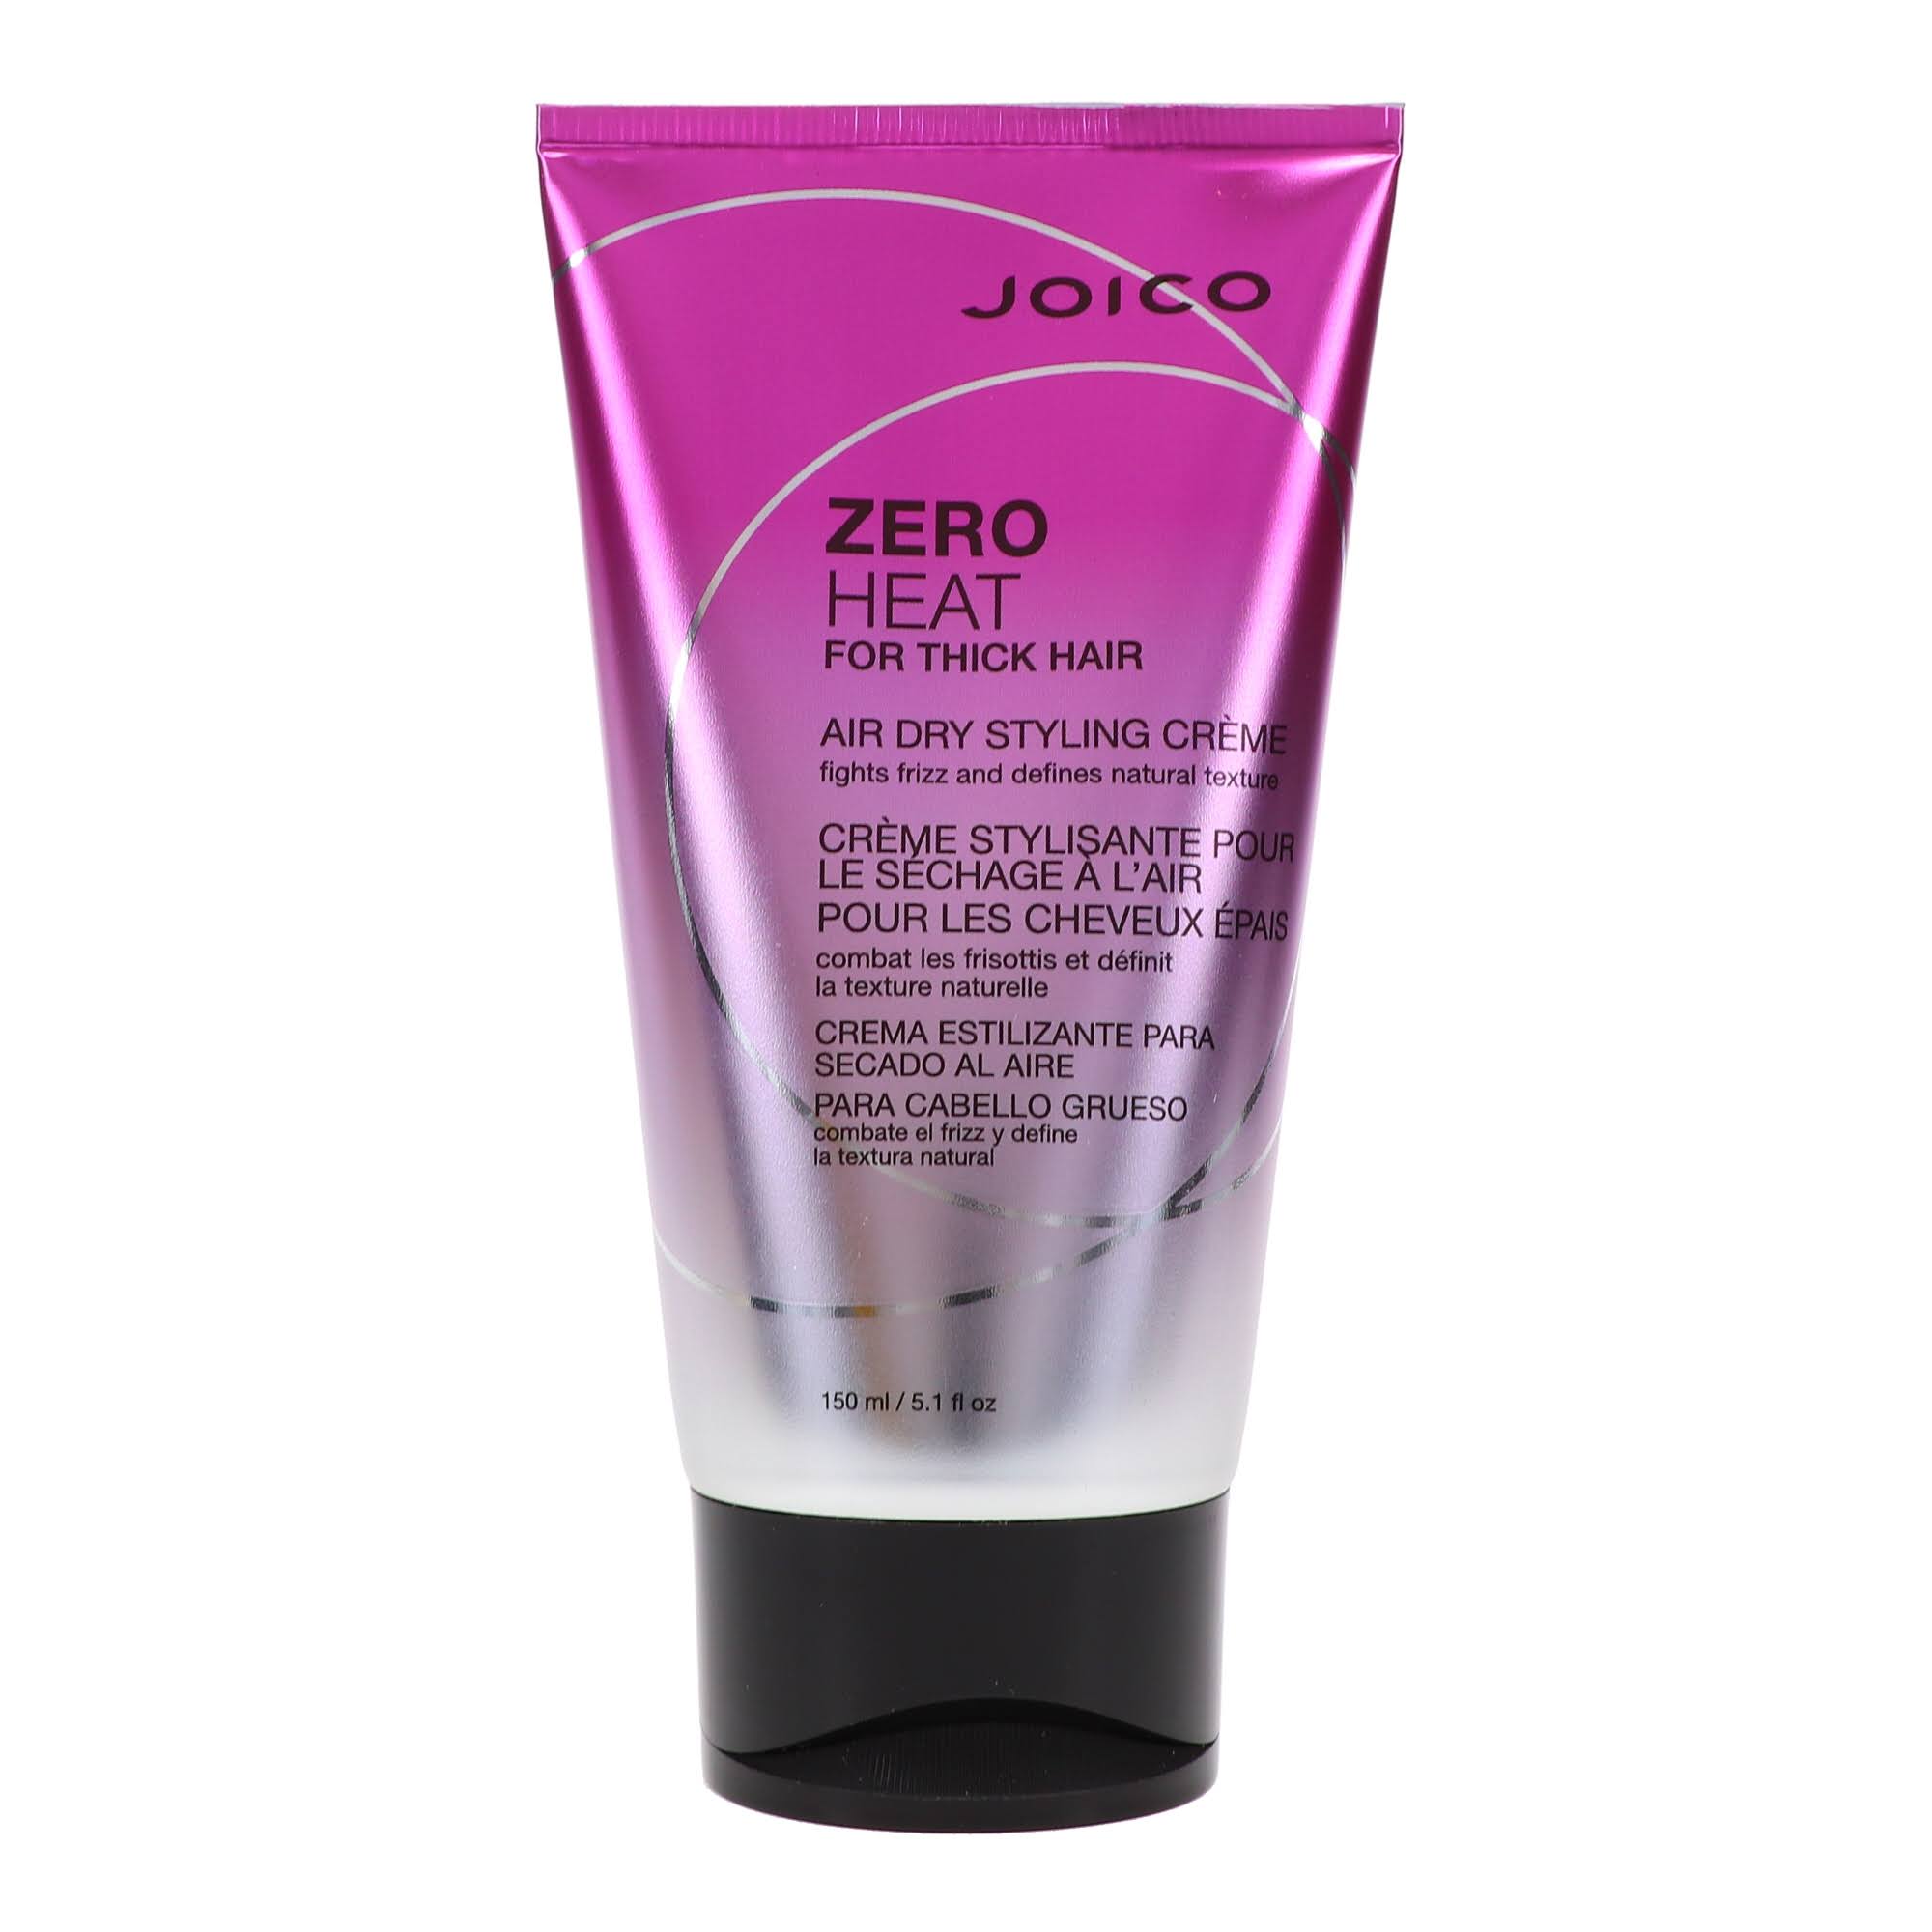 Joico Zero Heat Air Dry Styling Cream for Thick Hair - 5.1oz